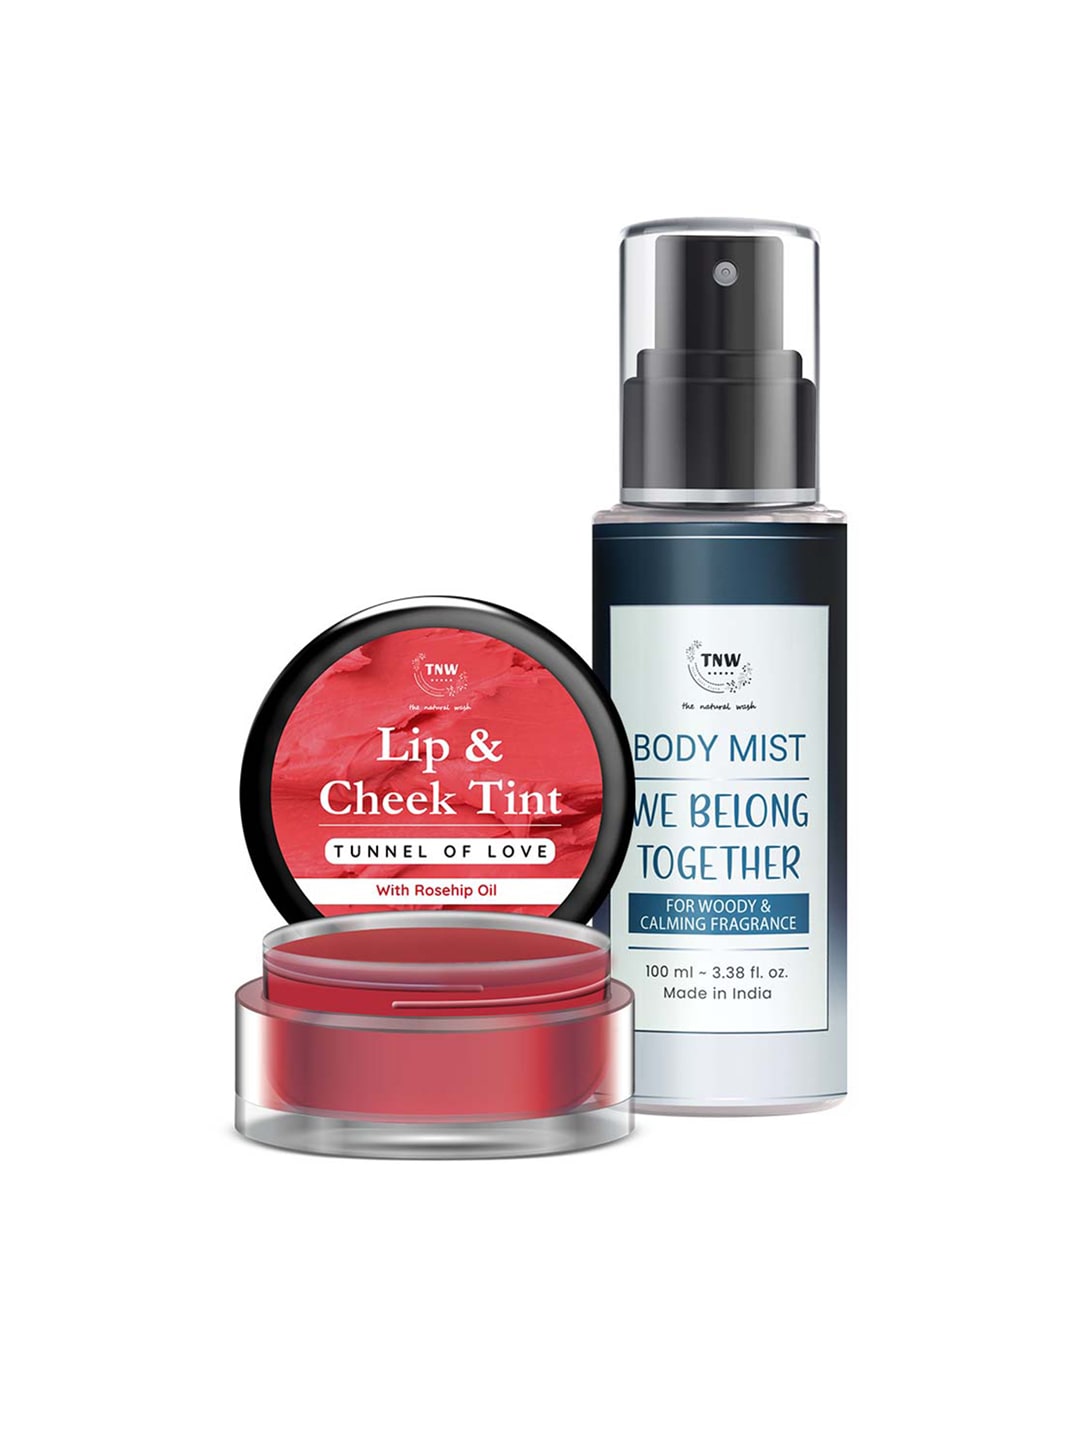 TNW the natural wash Tunnel of Love Lip & Cheek Tint - We Belong Together Body Mist Price in India